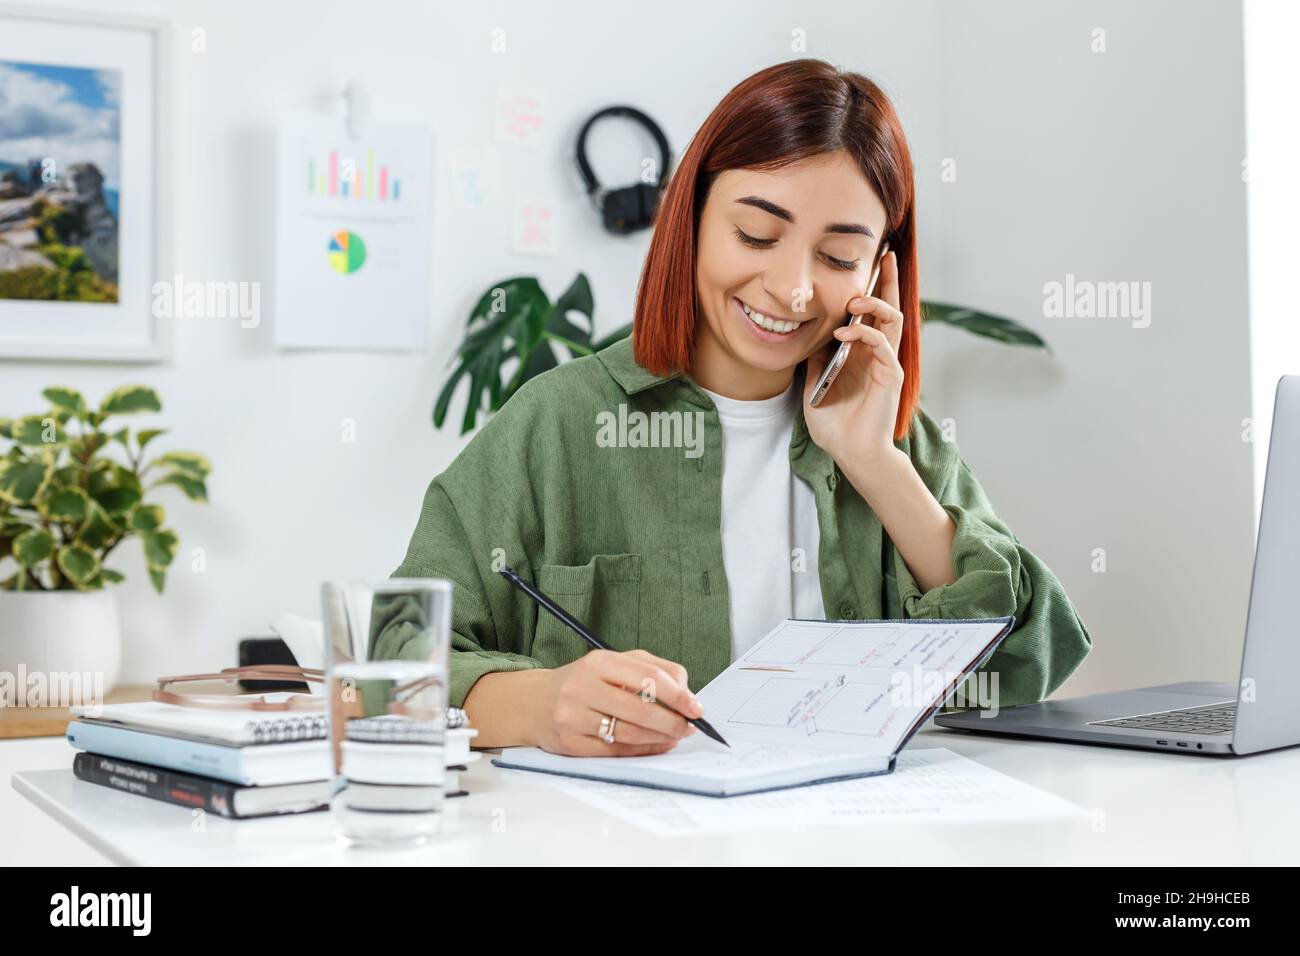 Woman remotely working at home with laptop computer. Young businesswoman talking by phone. Concept of online business or communication, home office an Stock Photo